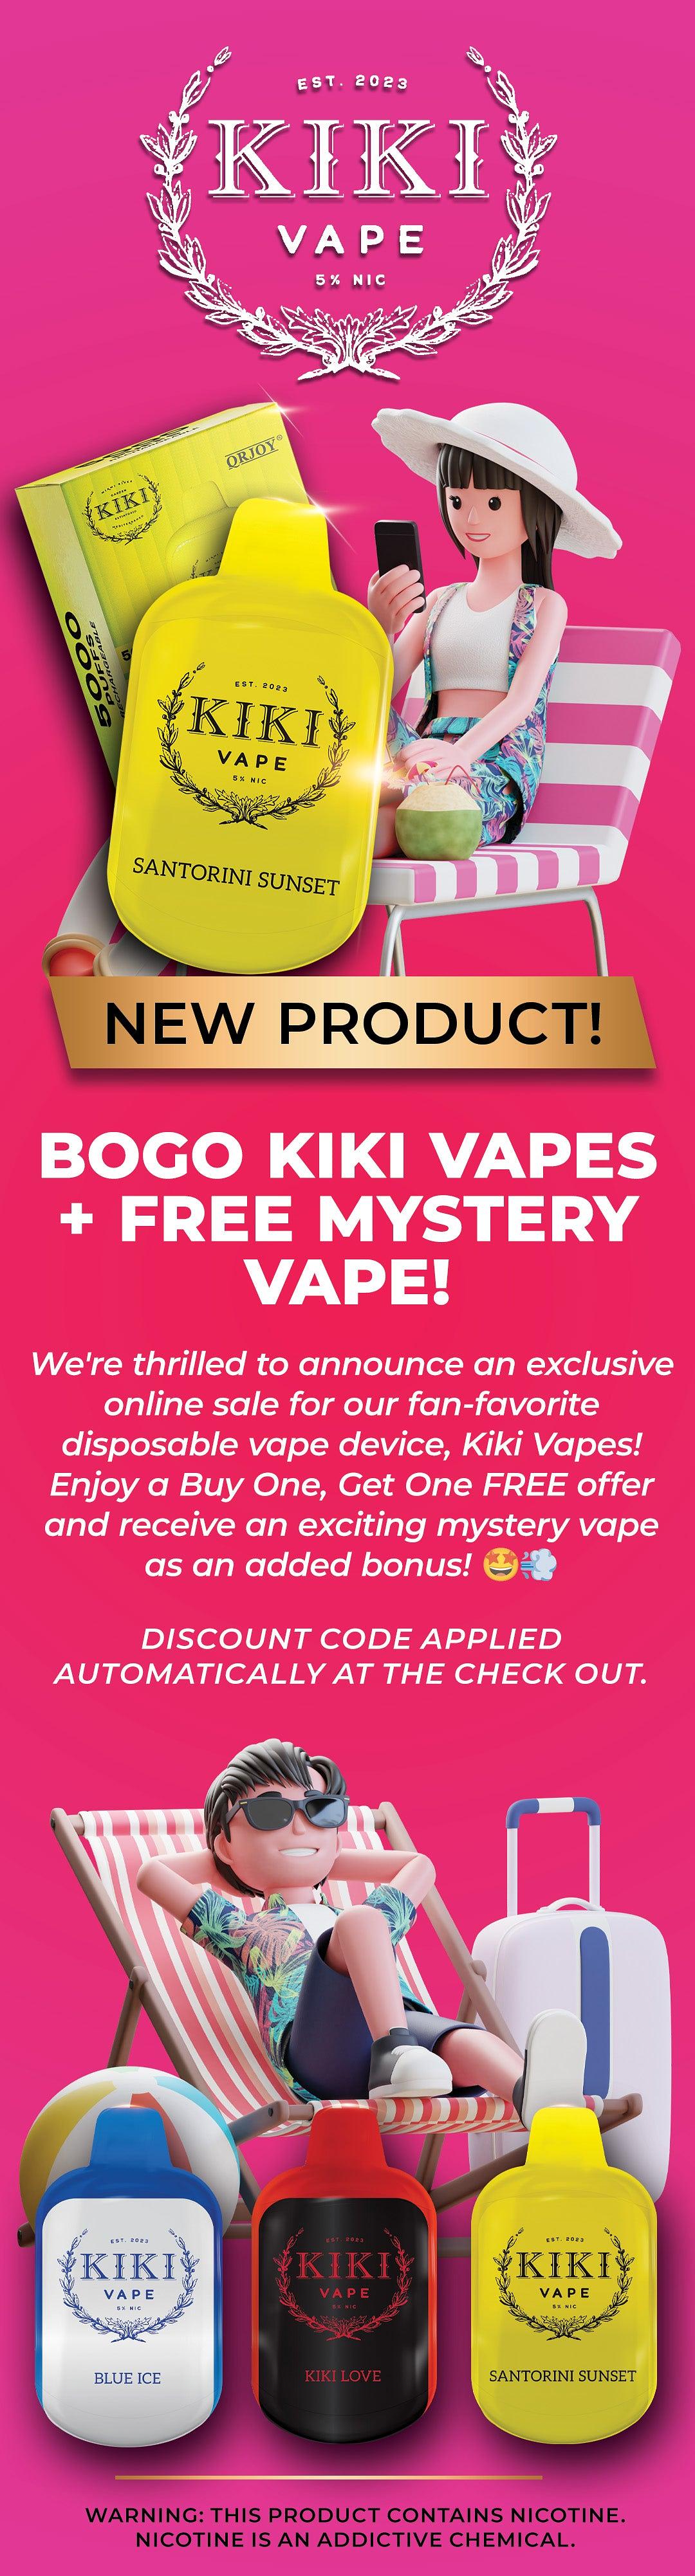  sT. 2023 BOGO KIKI VAPES FREE MYSTERY VAPE! We're thrilled to announce an exclusive online sale for our fan-favorite disposable vape device, Kiki Vapes! Enjoy a Buy One, Get One FREE offer and receive an exciting mystery vape pl as an added bonus! % DISCOUNT CODE APPLIED AUTOMATICALLY AT THE CHECK OUT. WARNING: THIS PRODUCT CONTAINS NICOTINE. NICOTINE IS AN ADDICTIVE CHEMICAL. 